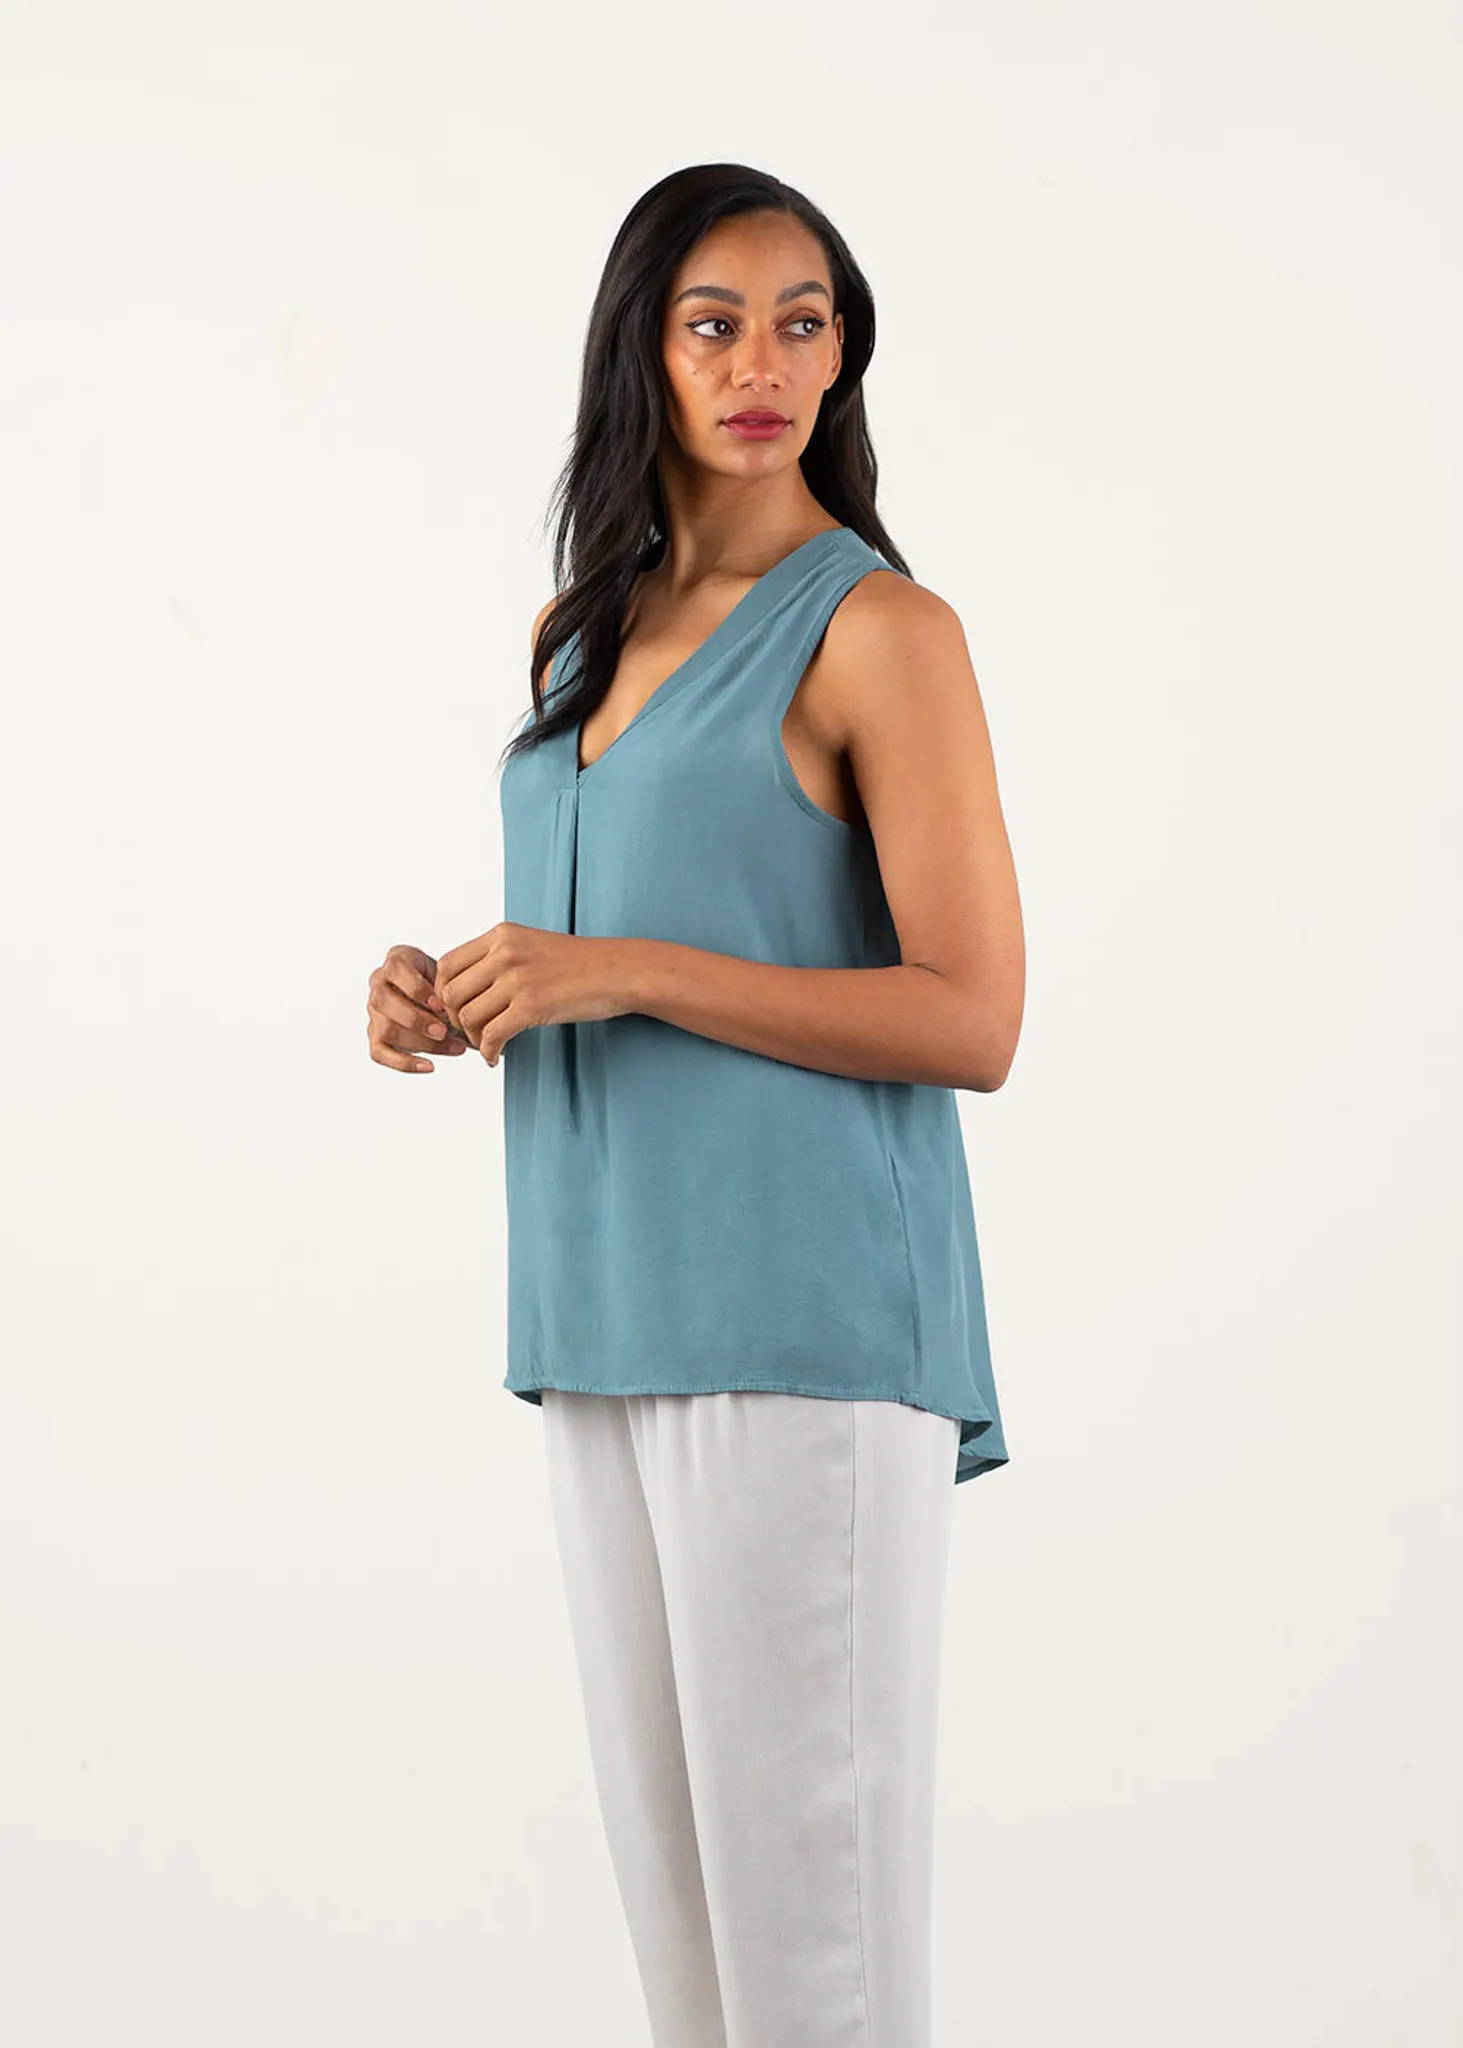 A model wearing a blue grey v neck sleeveless top with  oatmeal coloured trousers